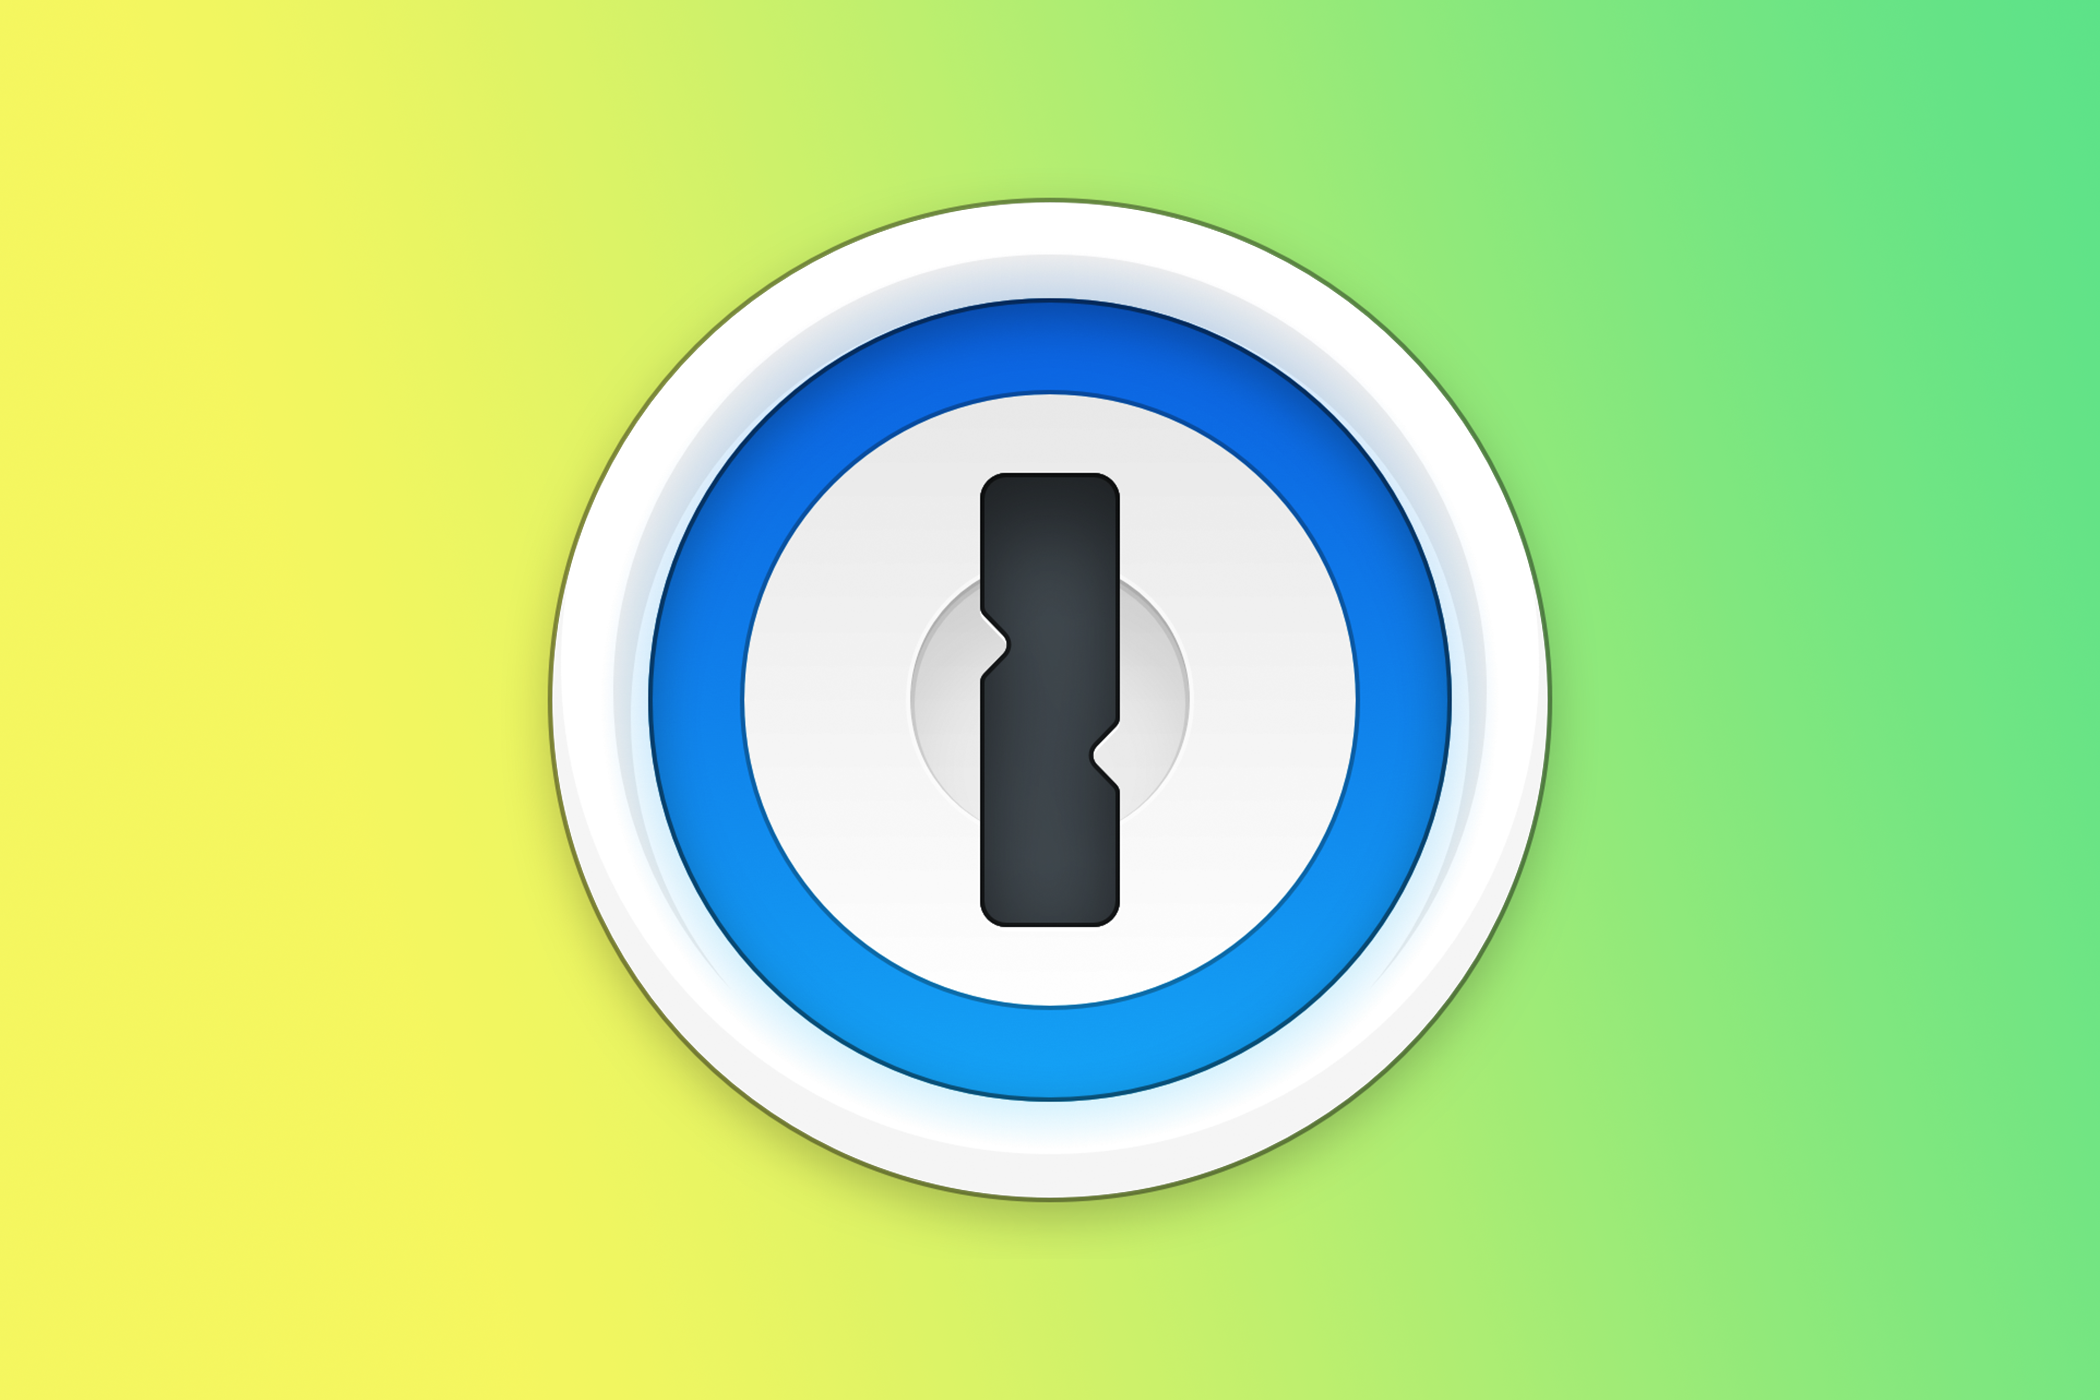 1Password logo on a green background.